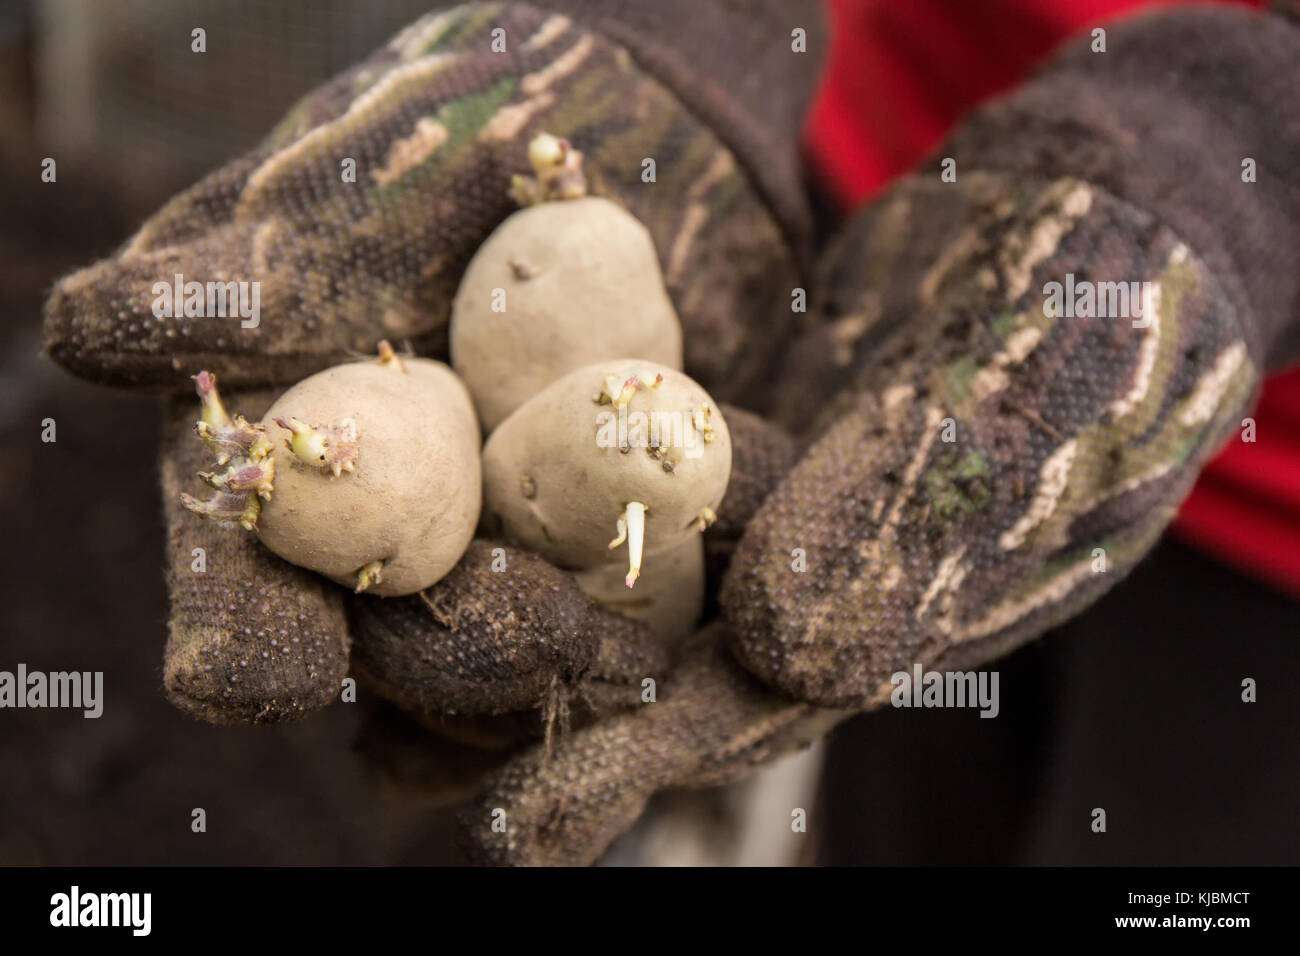 Woman holding three seed potatoes that are ready to plant in Isssaquah, Washington, USA.  Seed potatoes need to have at least one eye each. An 'eye' i Stock Photo